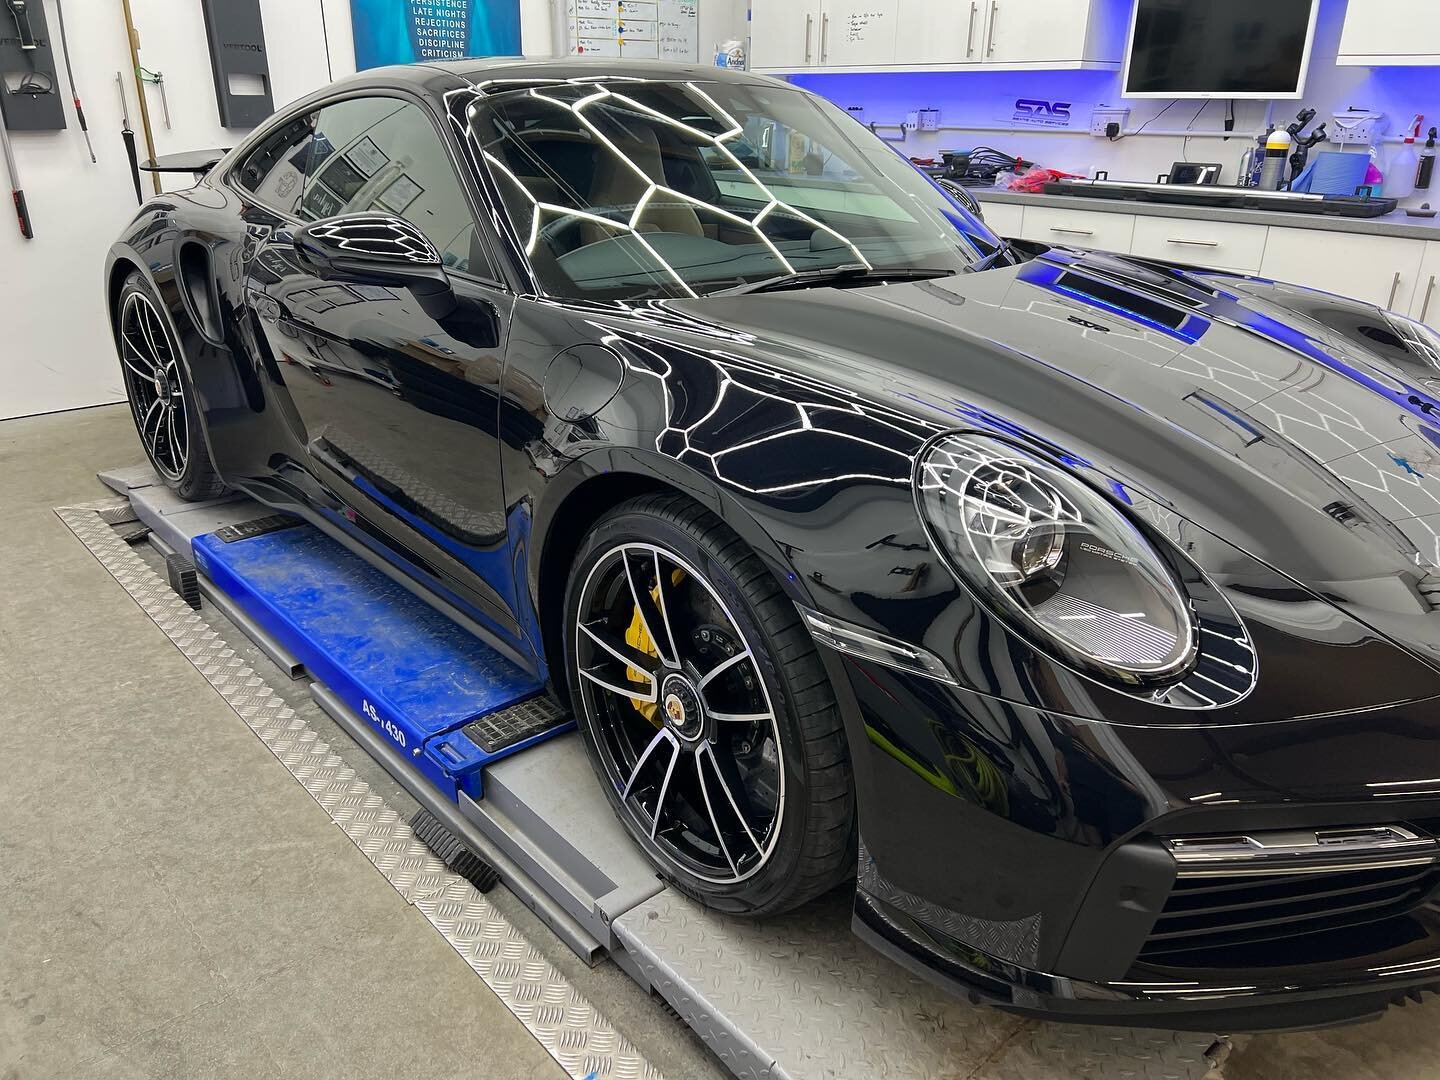 &lsquo;Bad boys&rsquo; black 992 Turbo S in for paint correction and ceramic coating, this thing is phat! 👌🏻 #detailing #gyeoncertifieddetailer #porsche #992turbos #badboys #ceramiccoating #paintcorrectionspecialists #vehicleenhancementspecialists